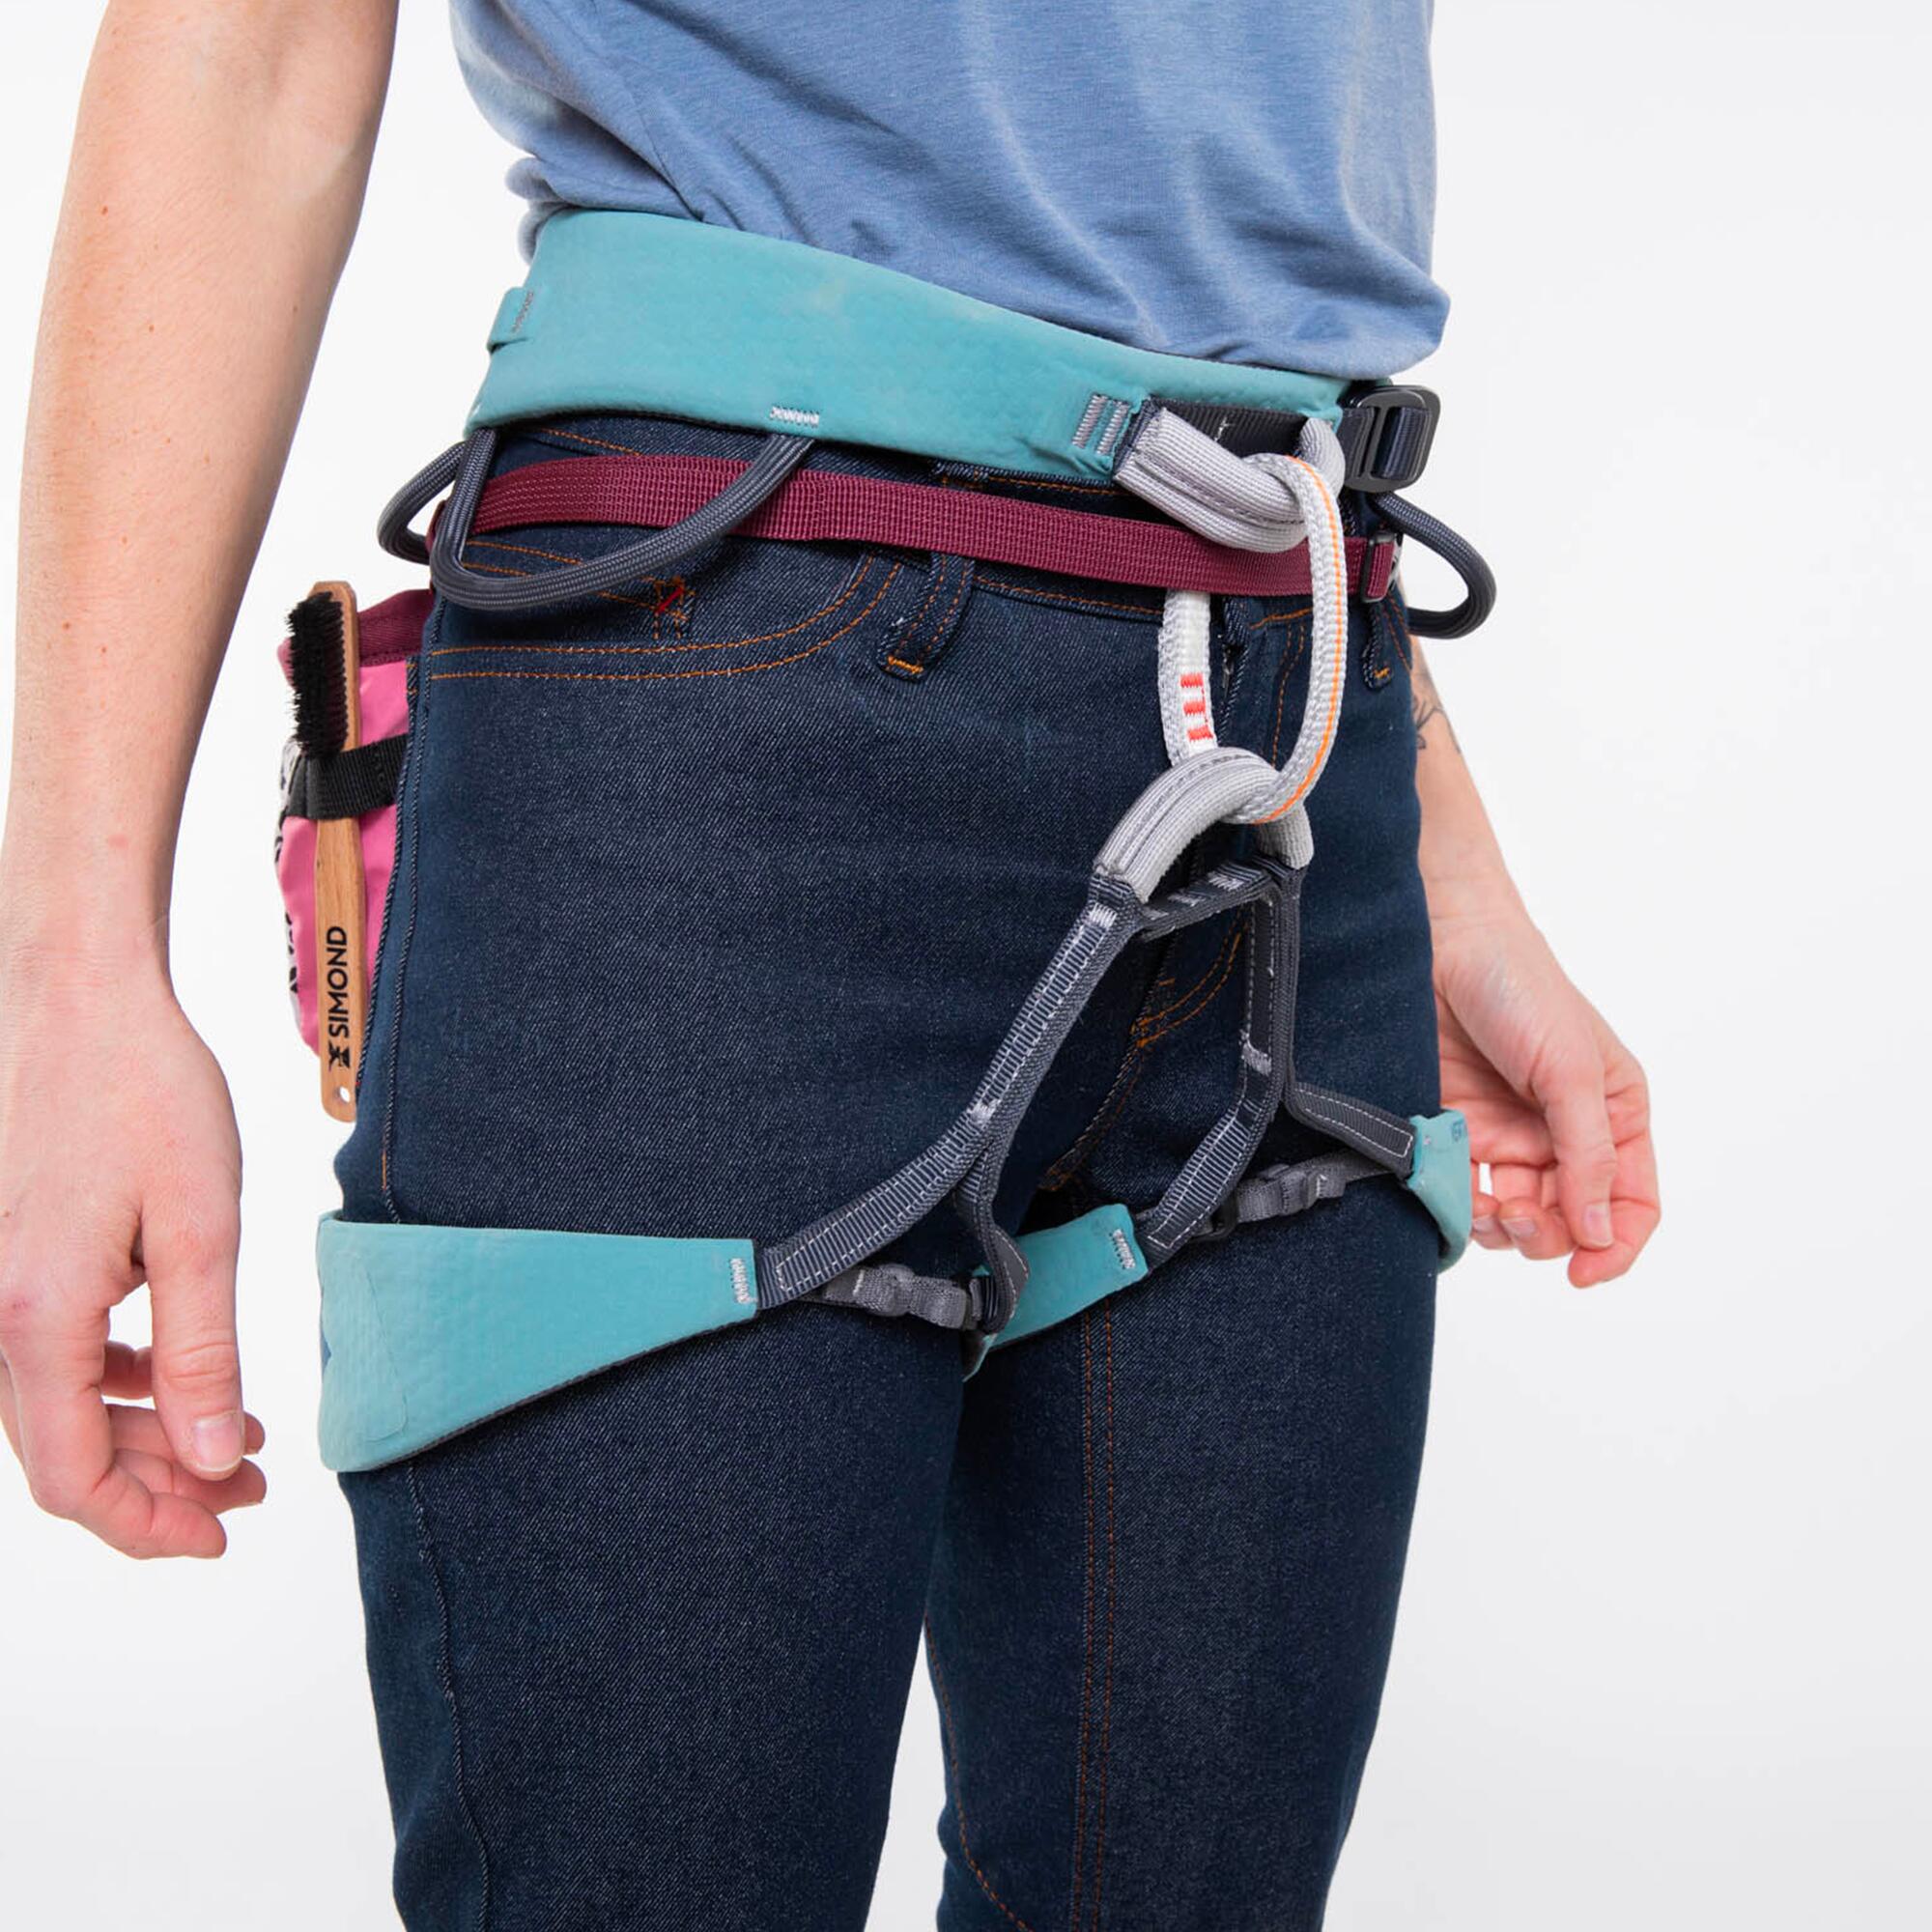 Women's climbing jeans made in France - 1083 4/10